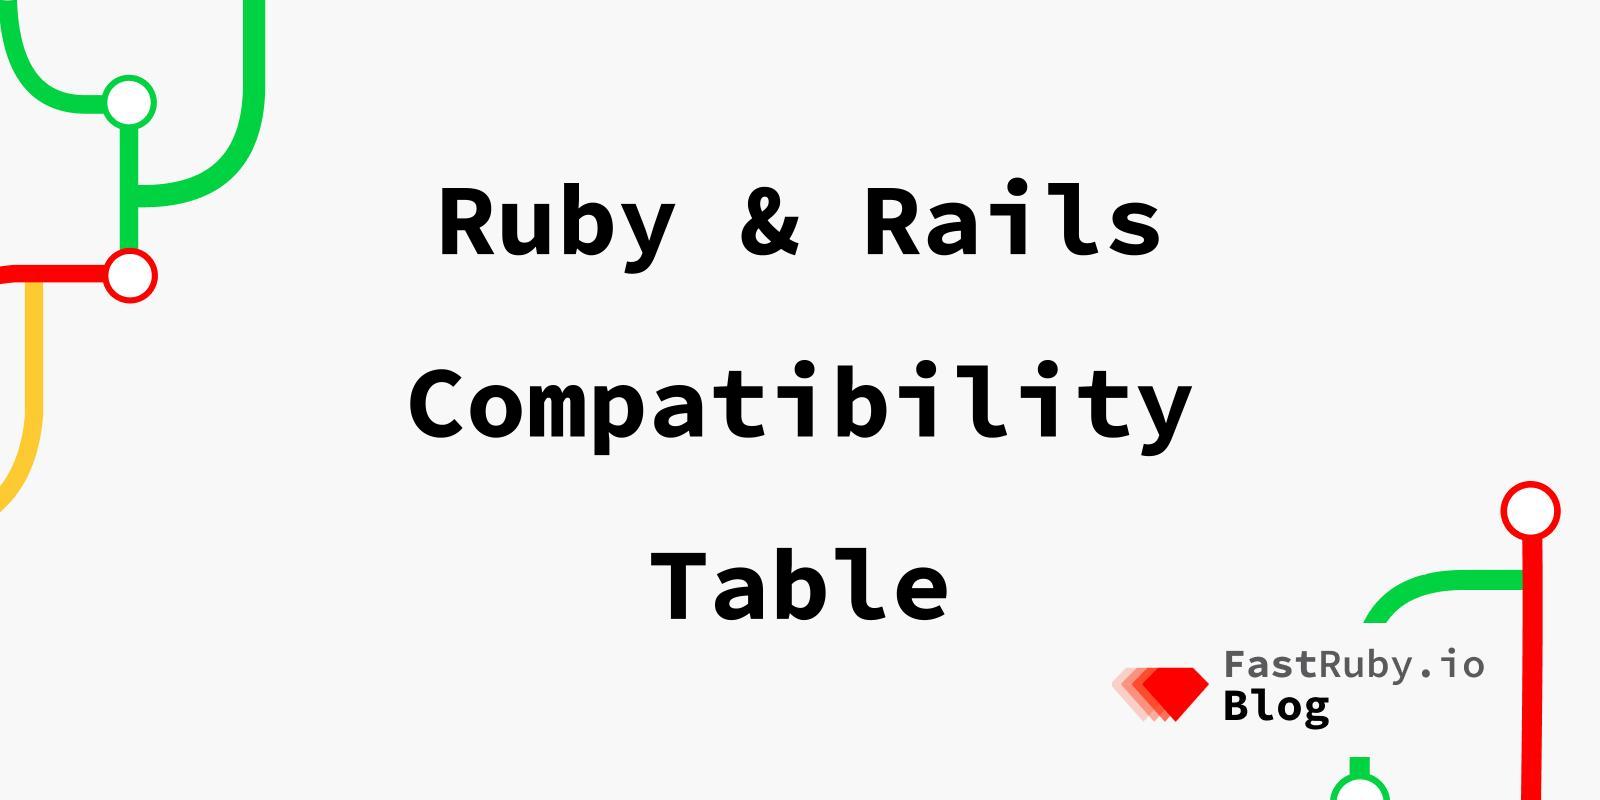 Ruby & Rails Compatibility Table